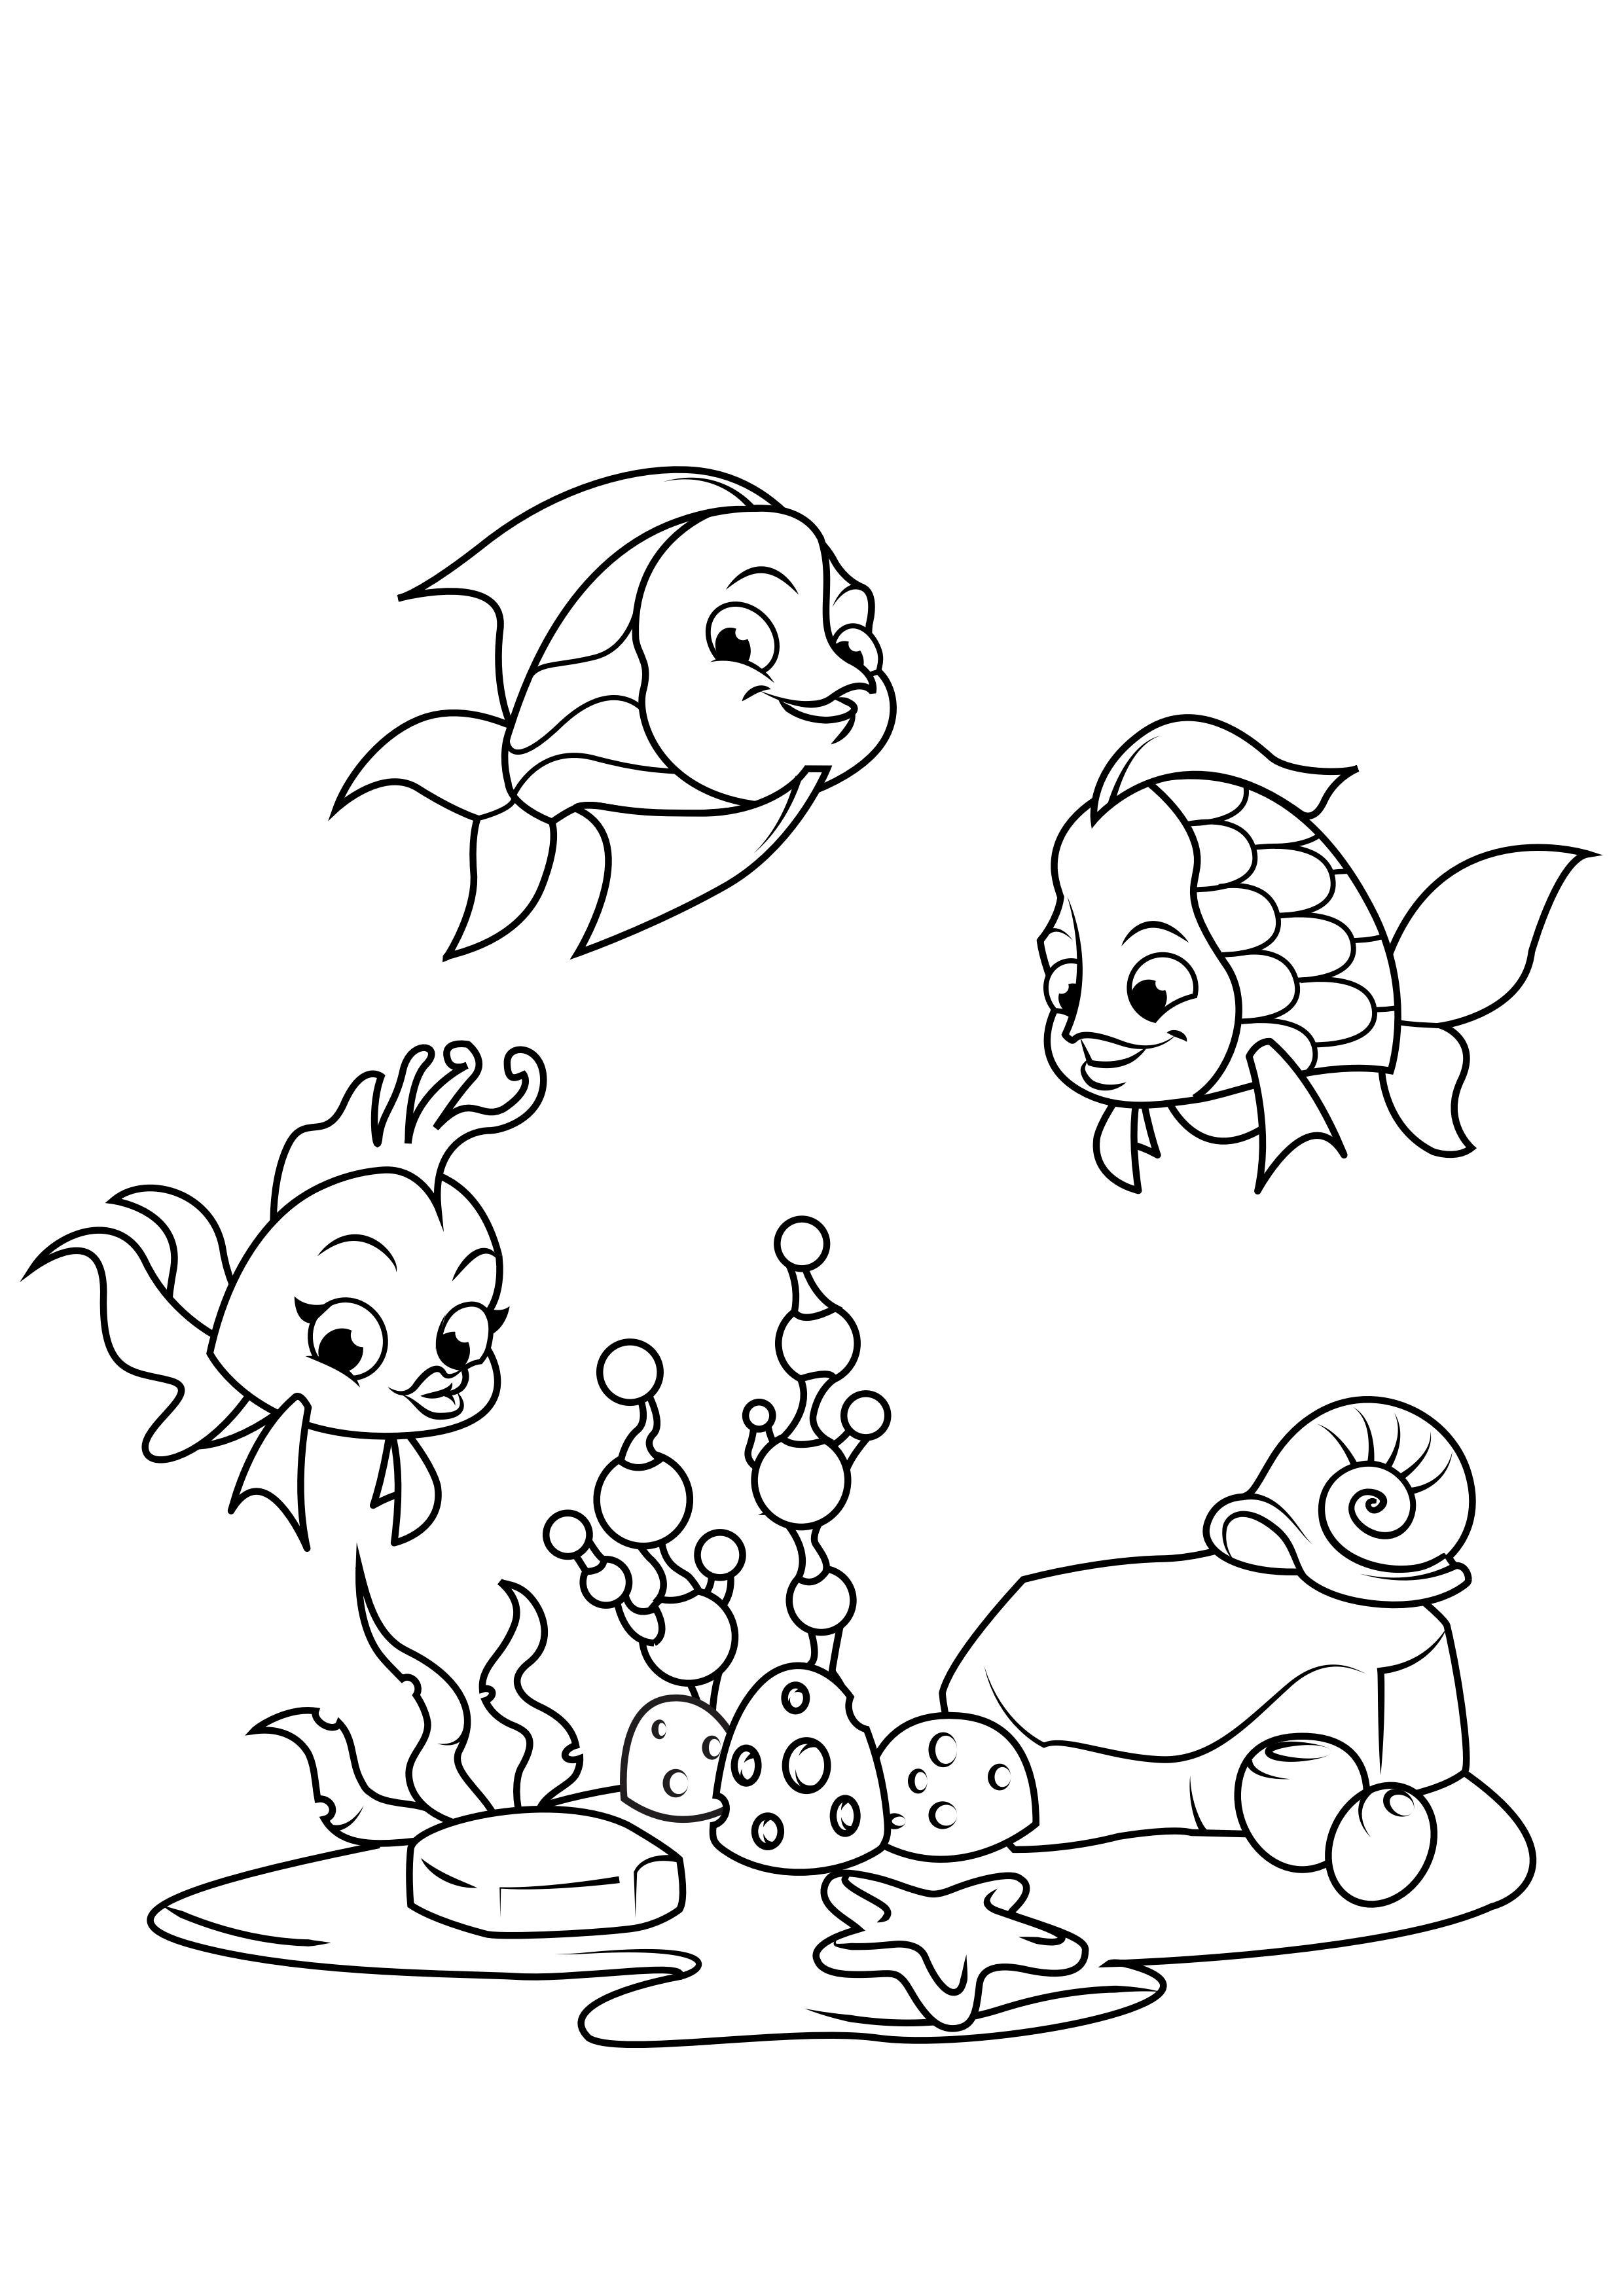 Coloring page fish with friends